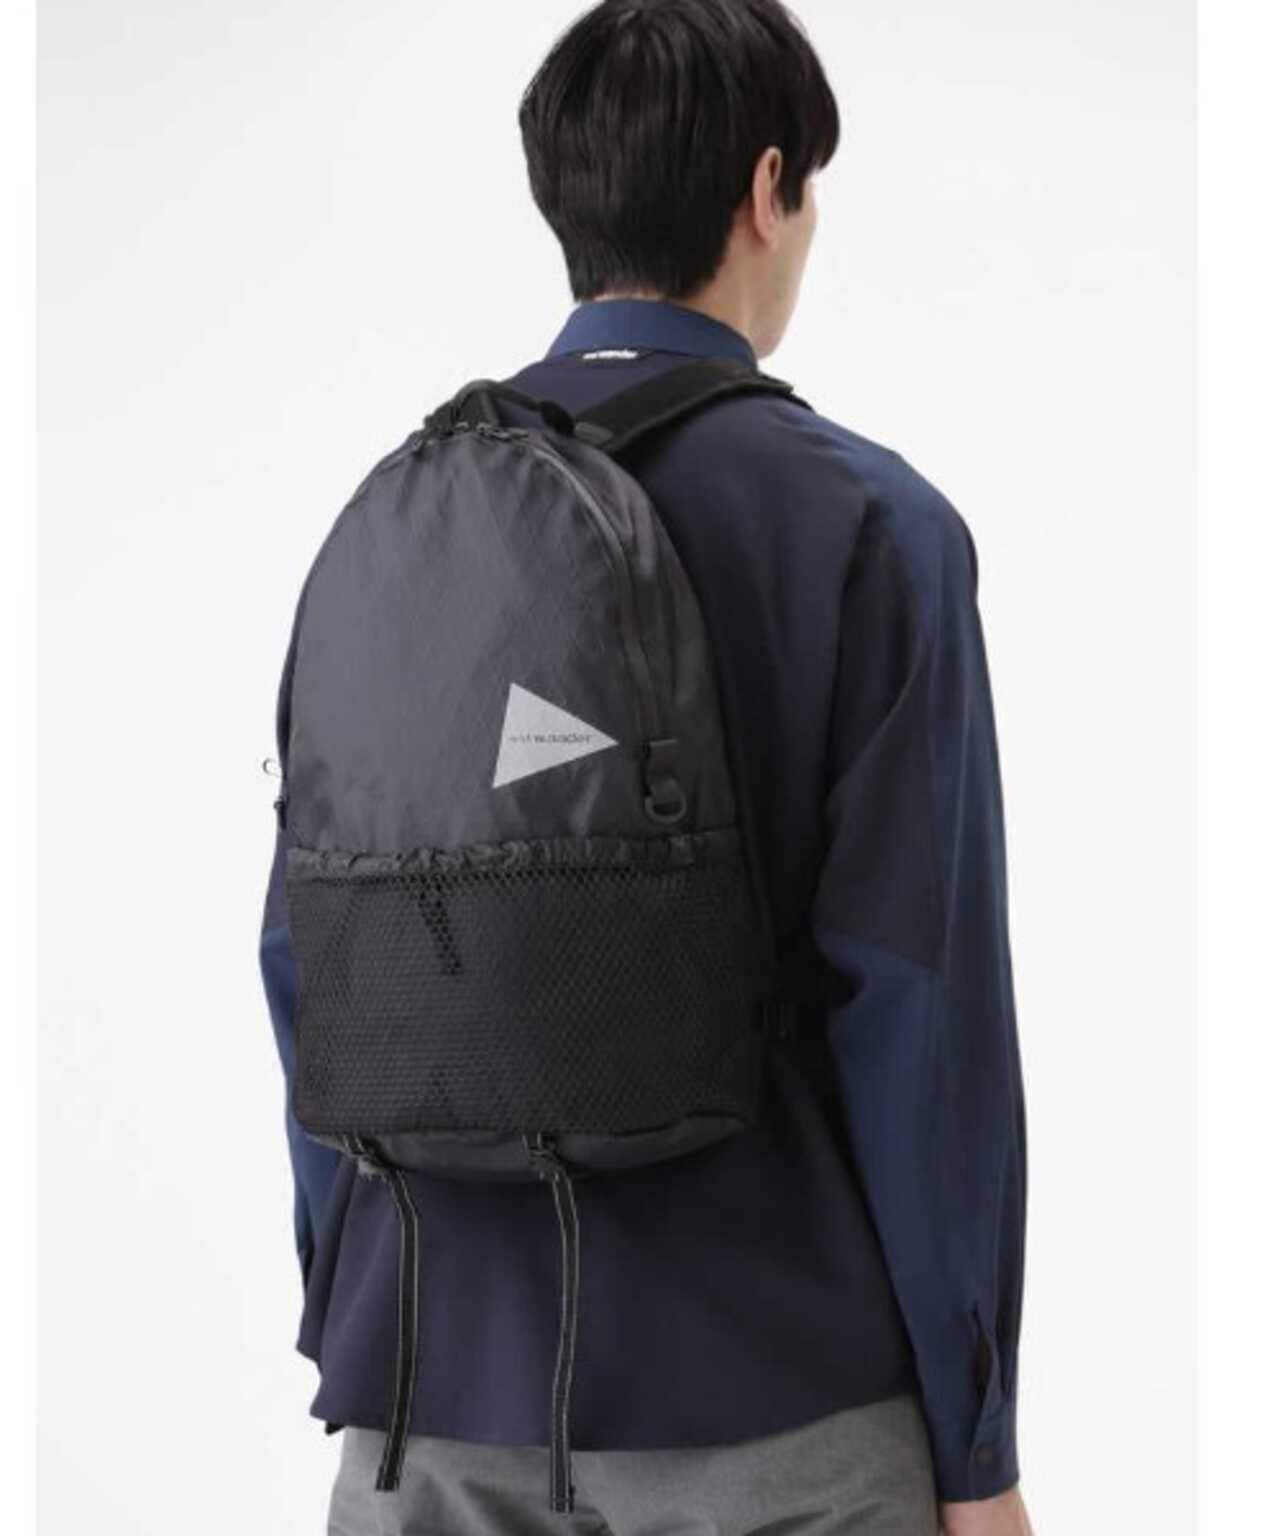 and wander FOR 1LDK 別注20L DAYPACK NAVY